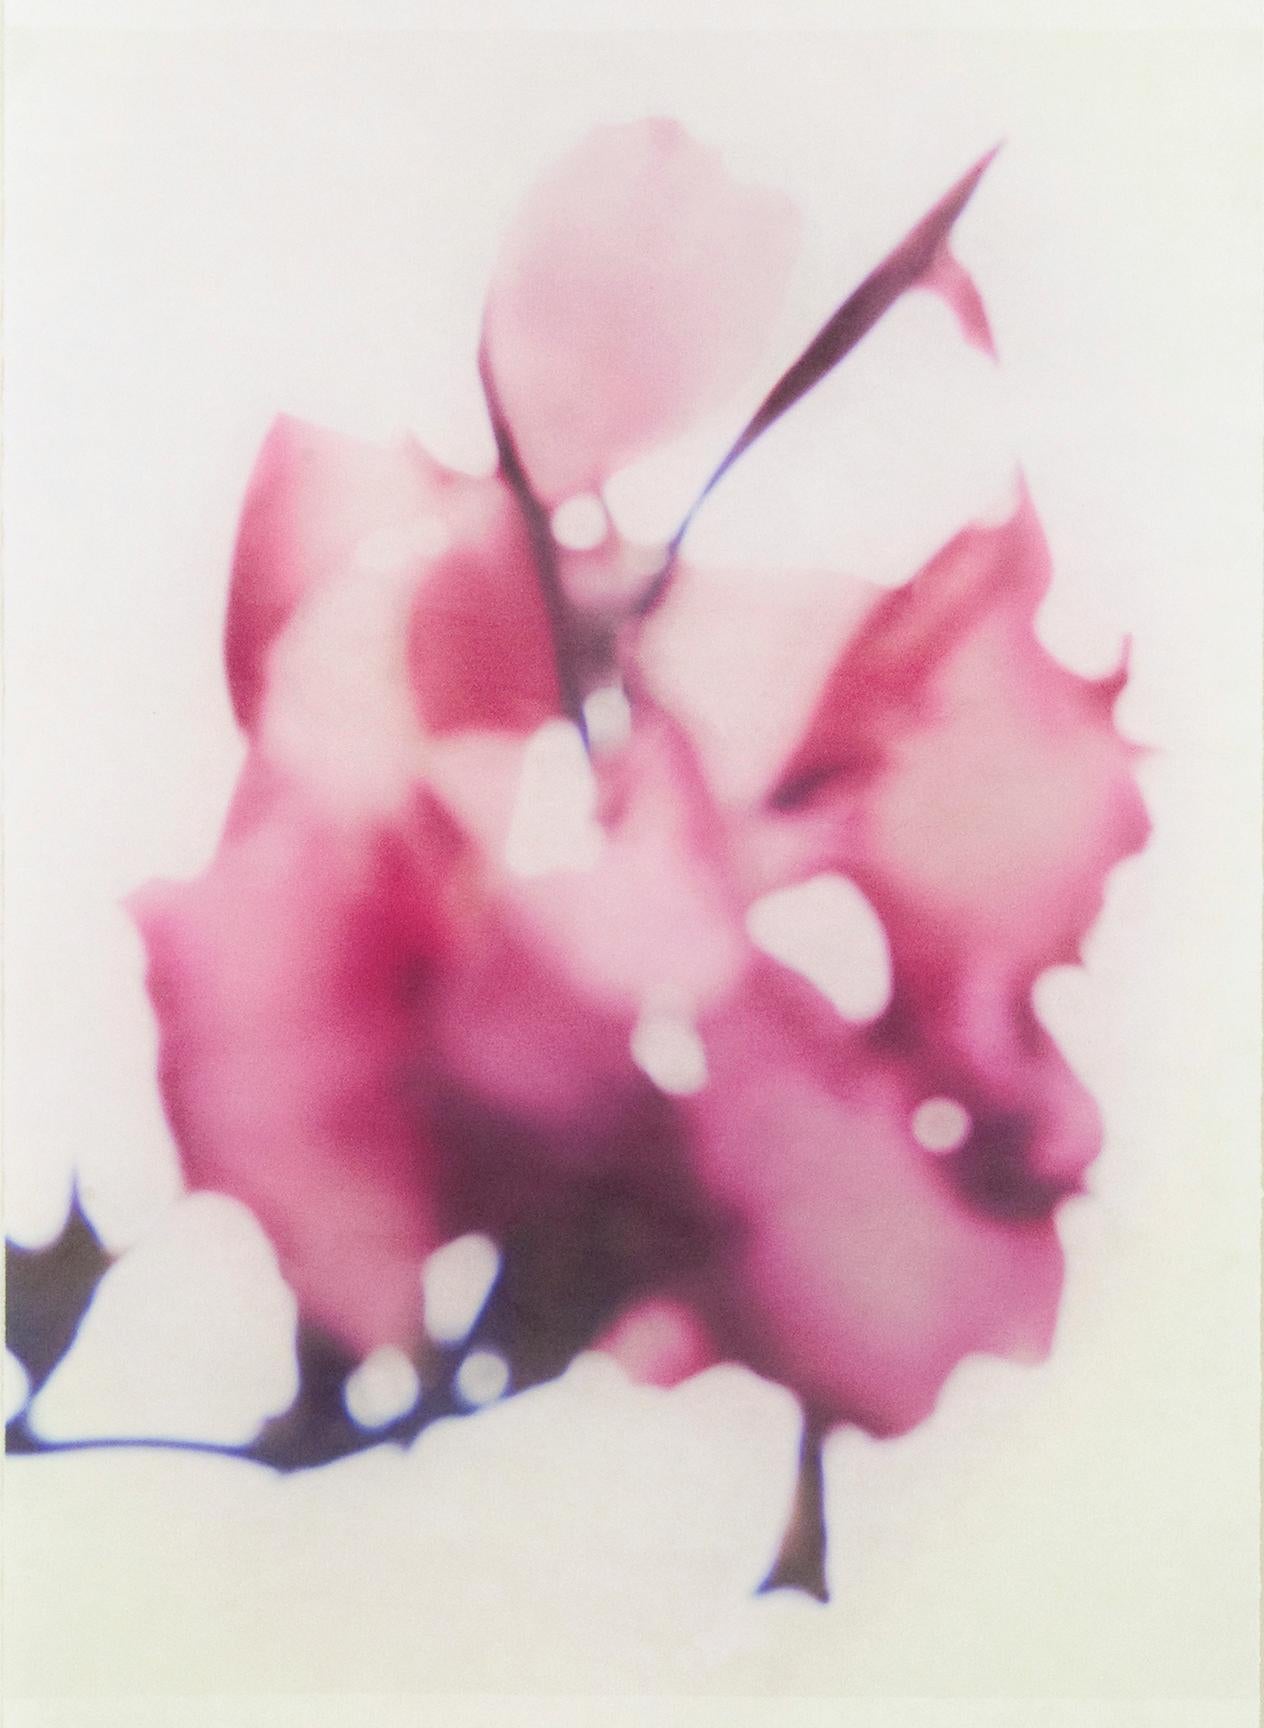 Canna No. 5 (Abstract Still Life Photograph of Magenta Lily Flower on White)